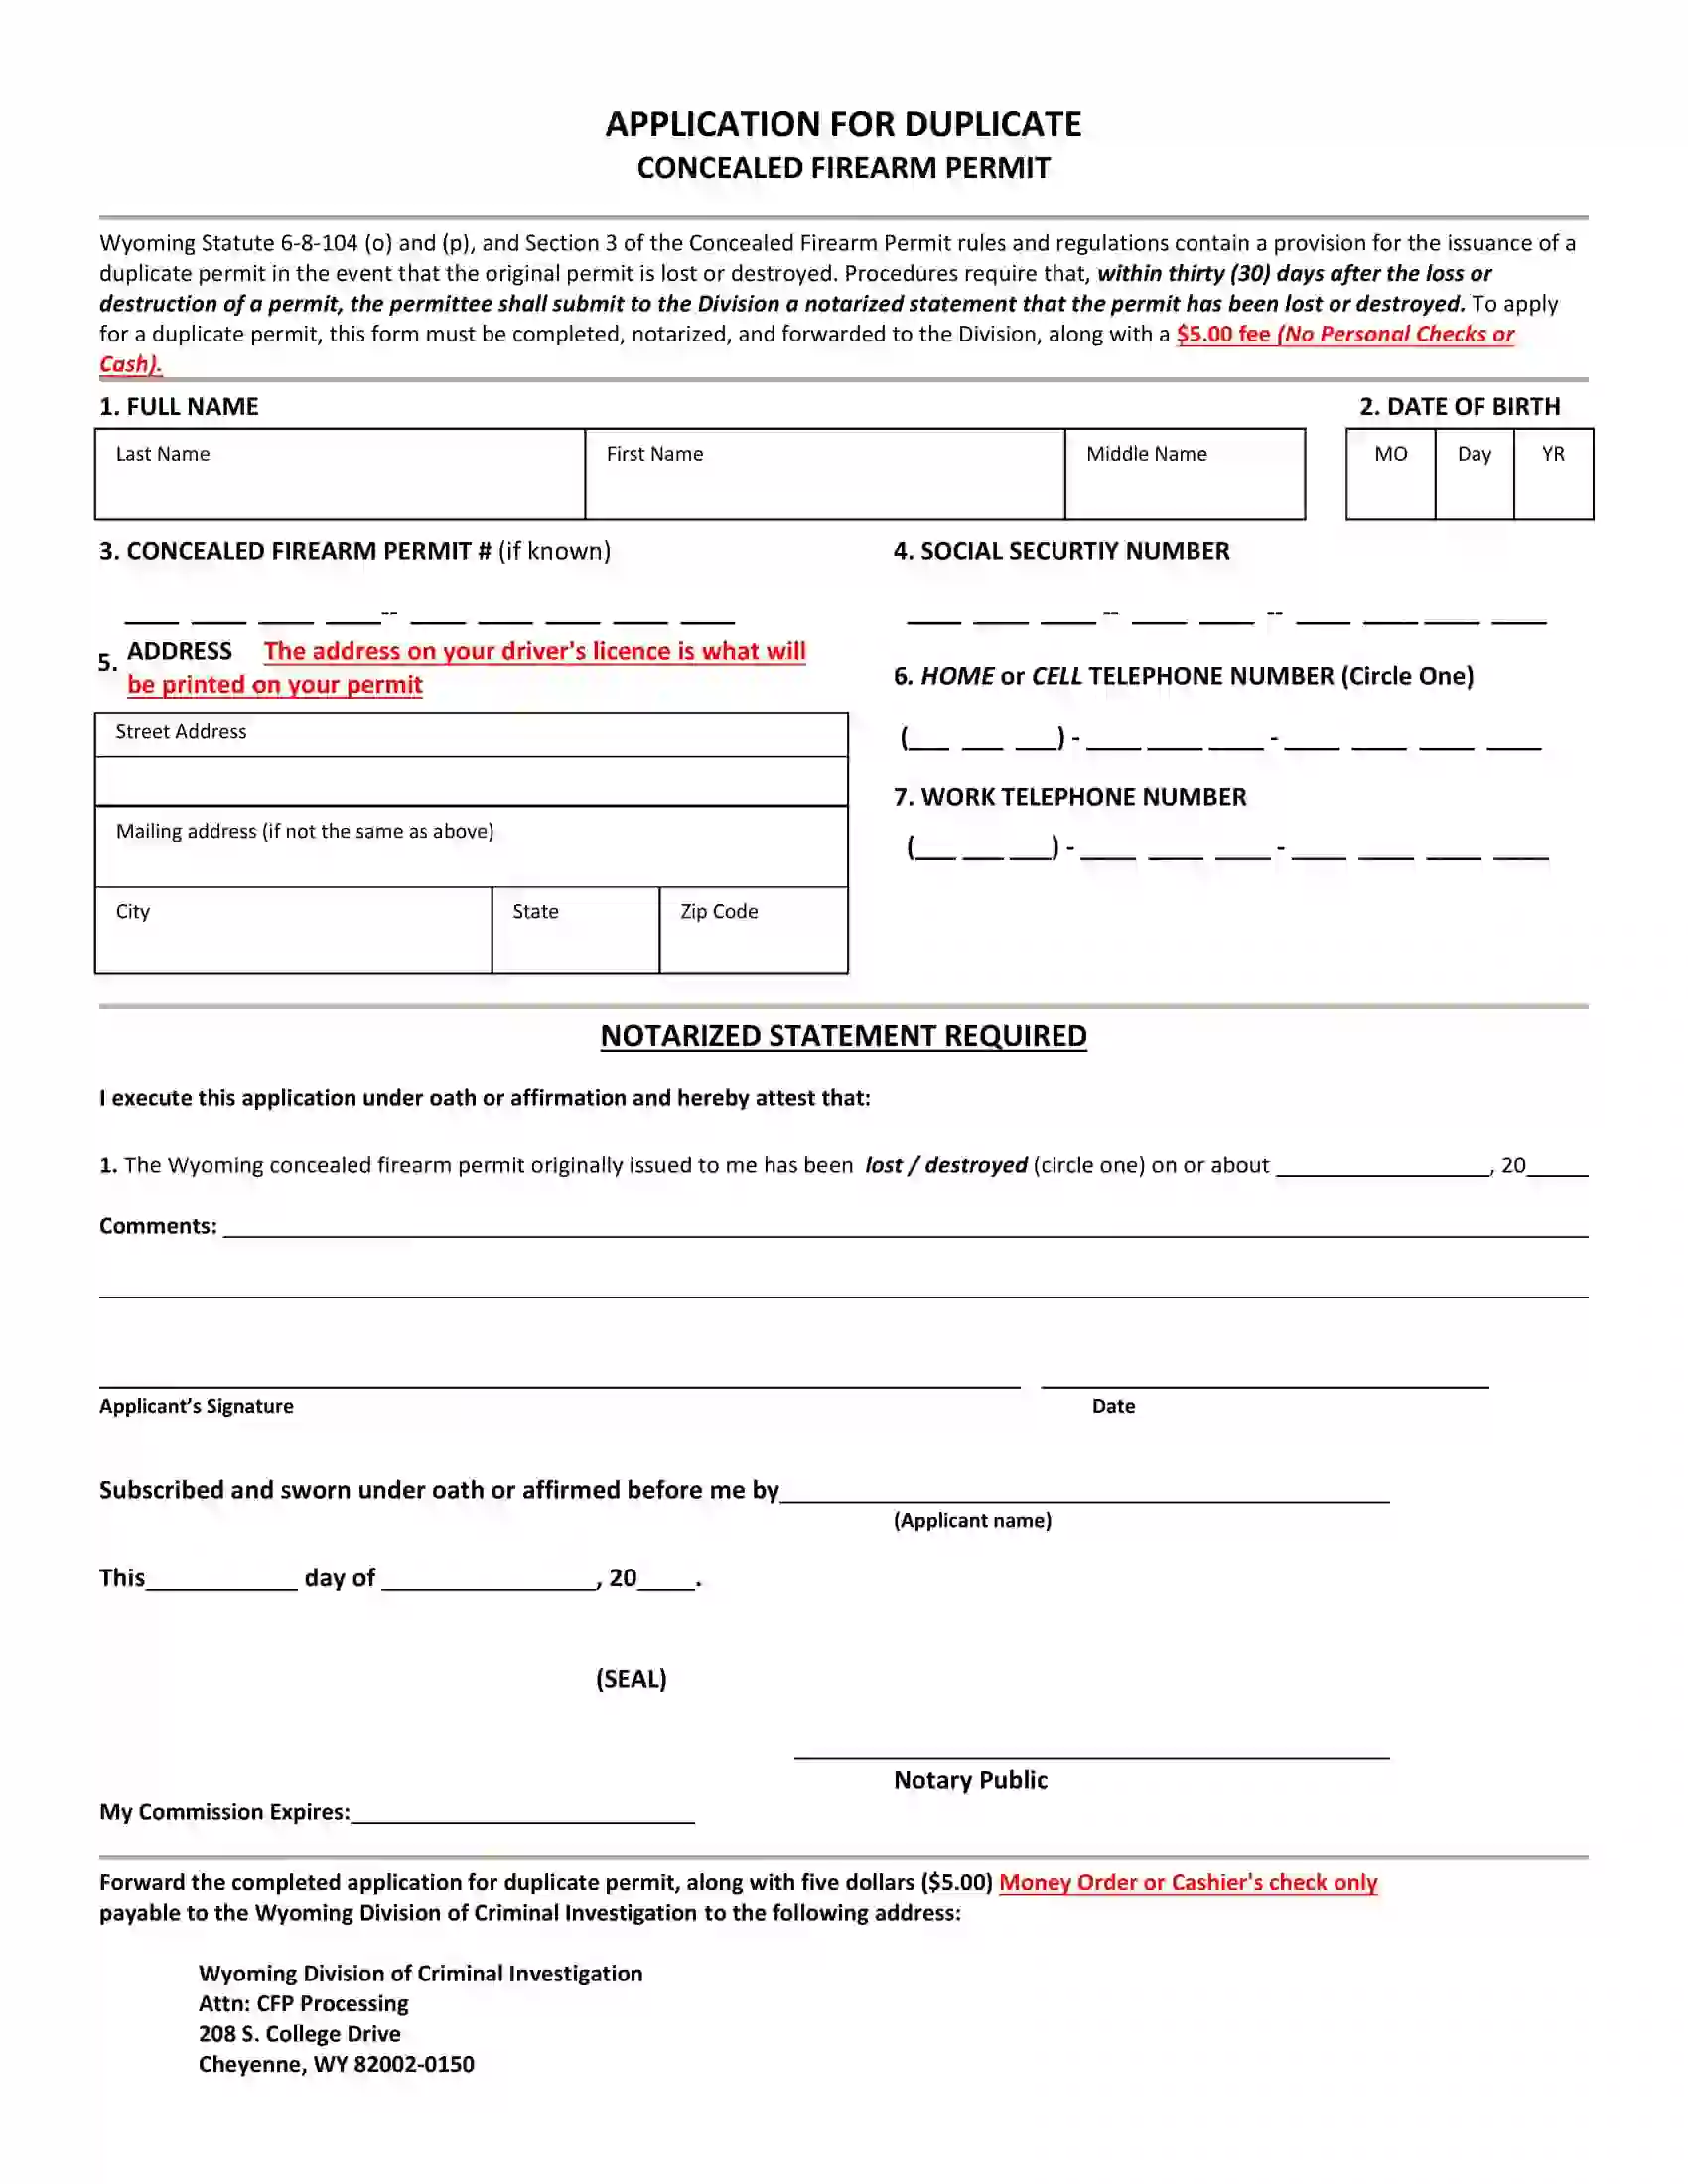 Concealed Weapon Permit Duplicate Application